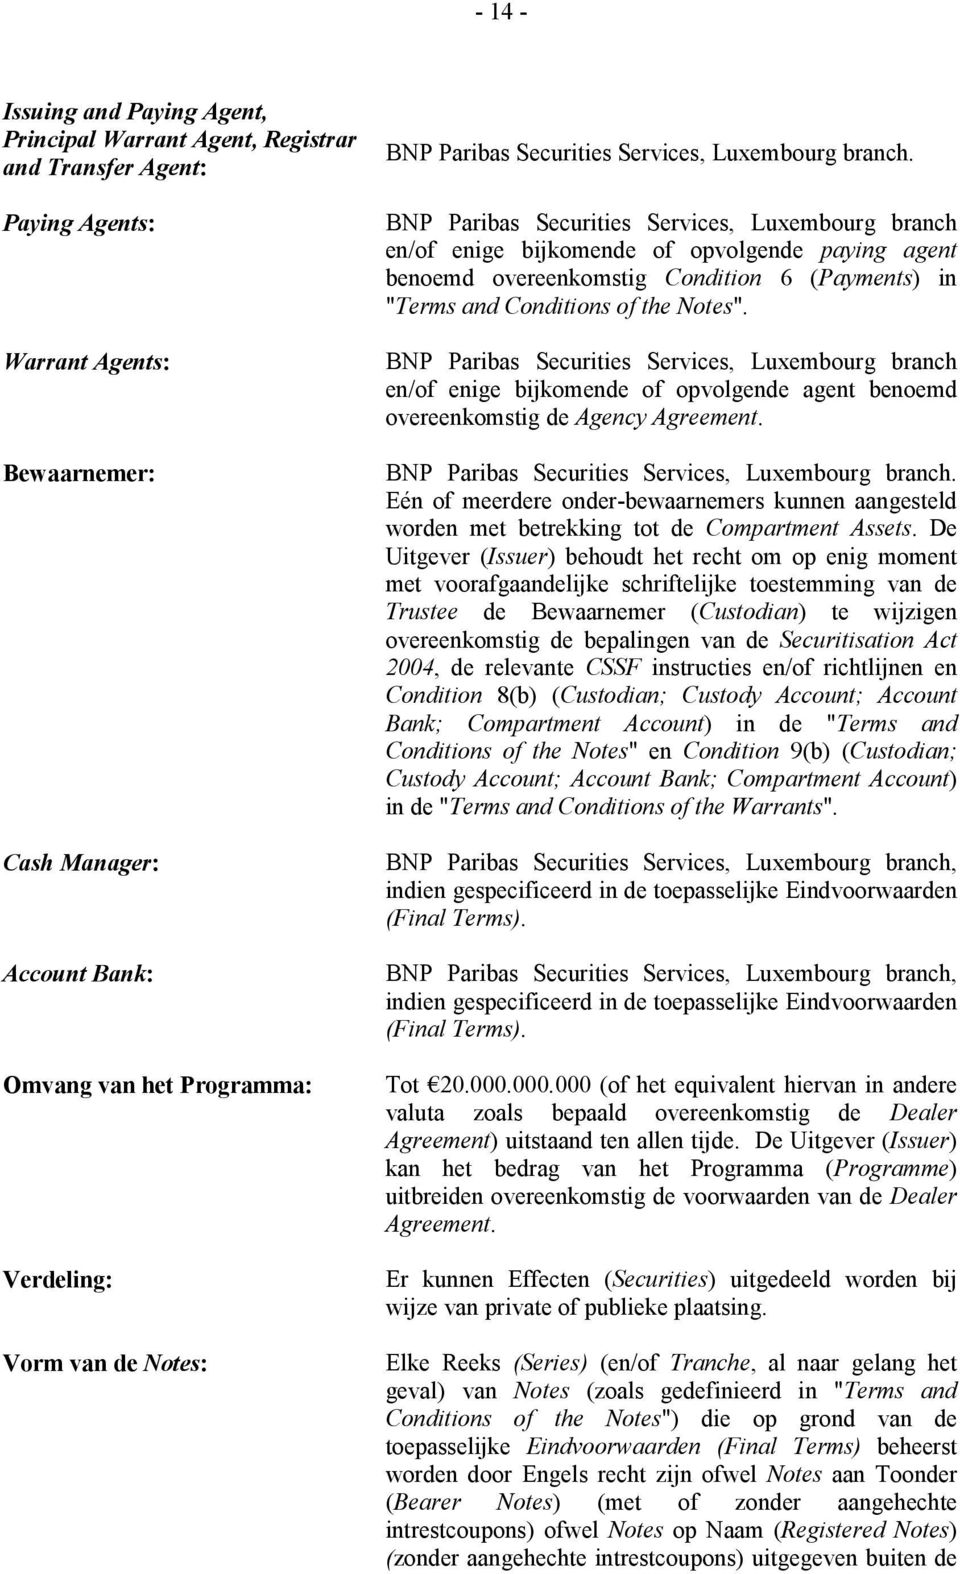 BNP Paribas Securities Services, Luxembourg branch en/of enige bijkomende of opvolgende paying agent benoemd overeenkomstig Condition 6 (Payments) in "Terms and Conditions of the Notes".